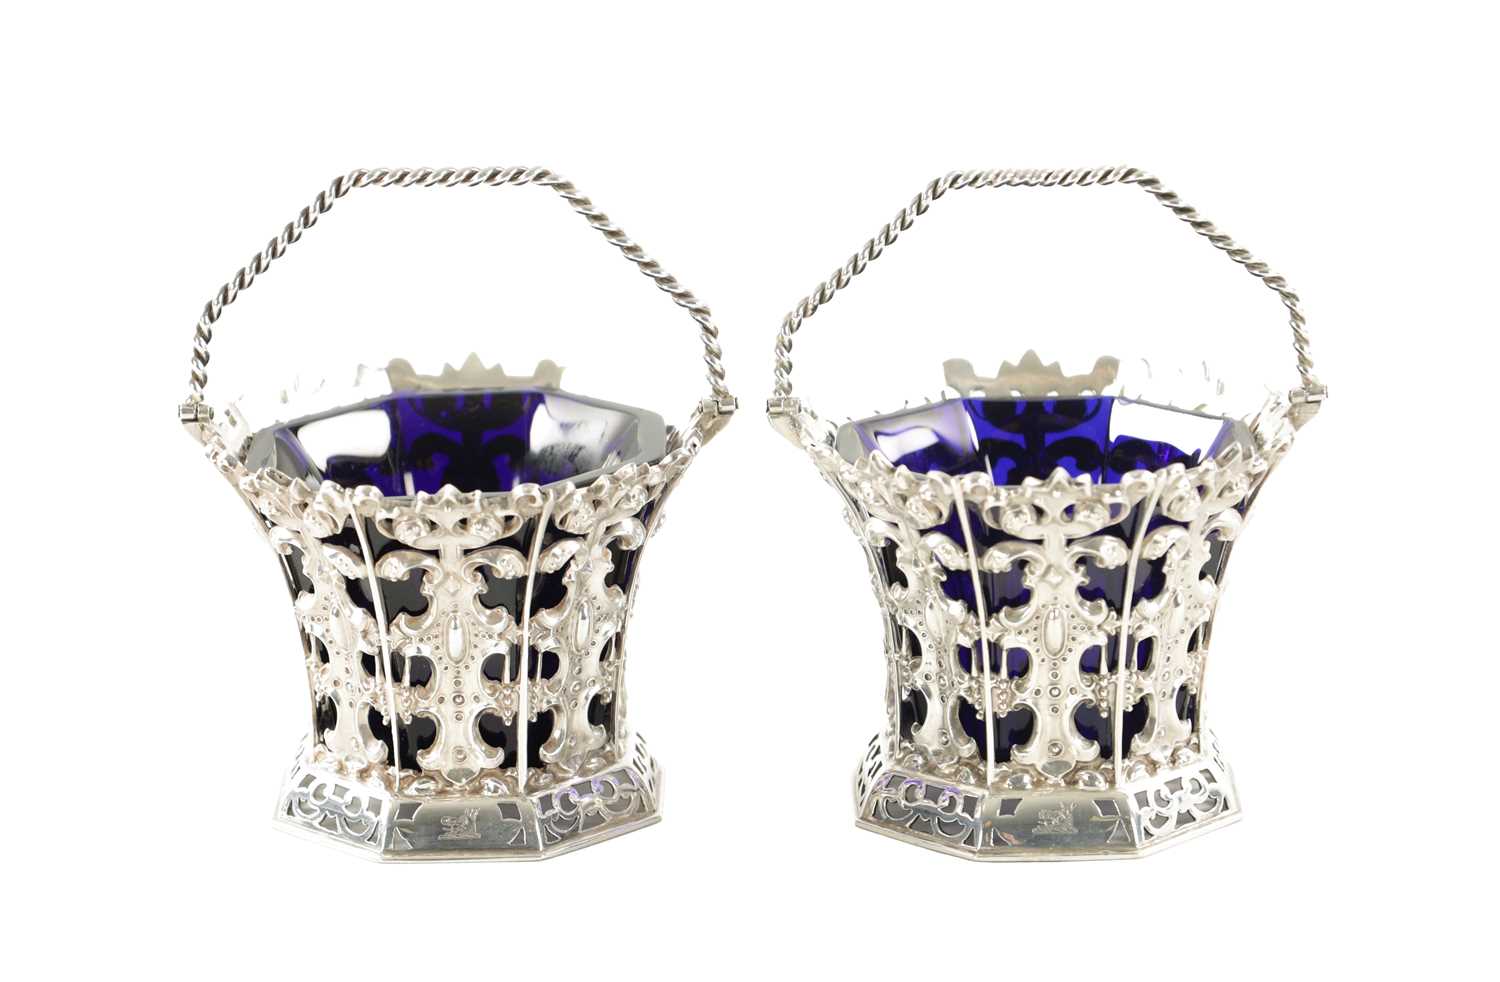 A PAIR OF MID 19TH CENTURY SILVER SWEET BASKETS